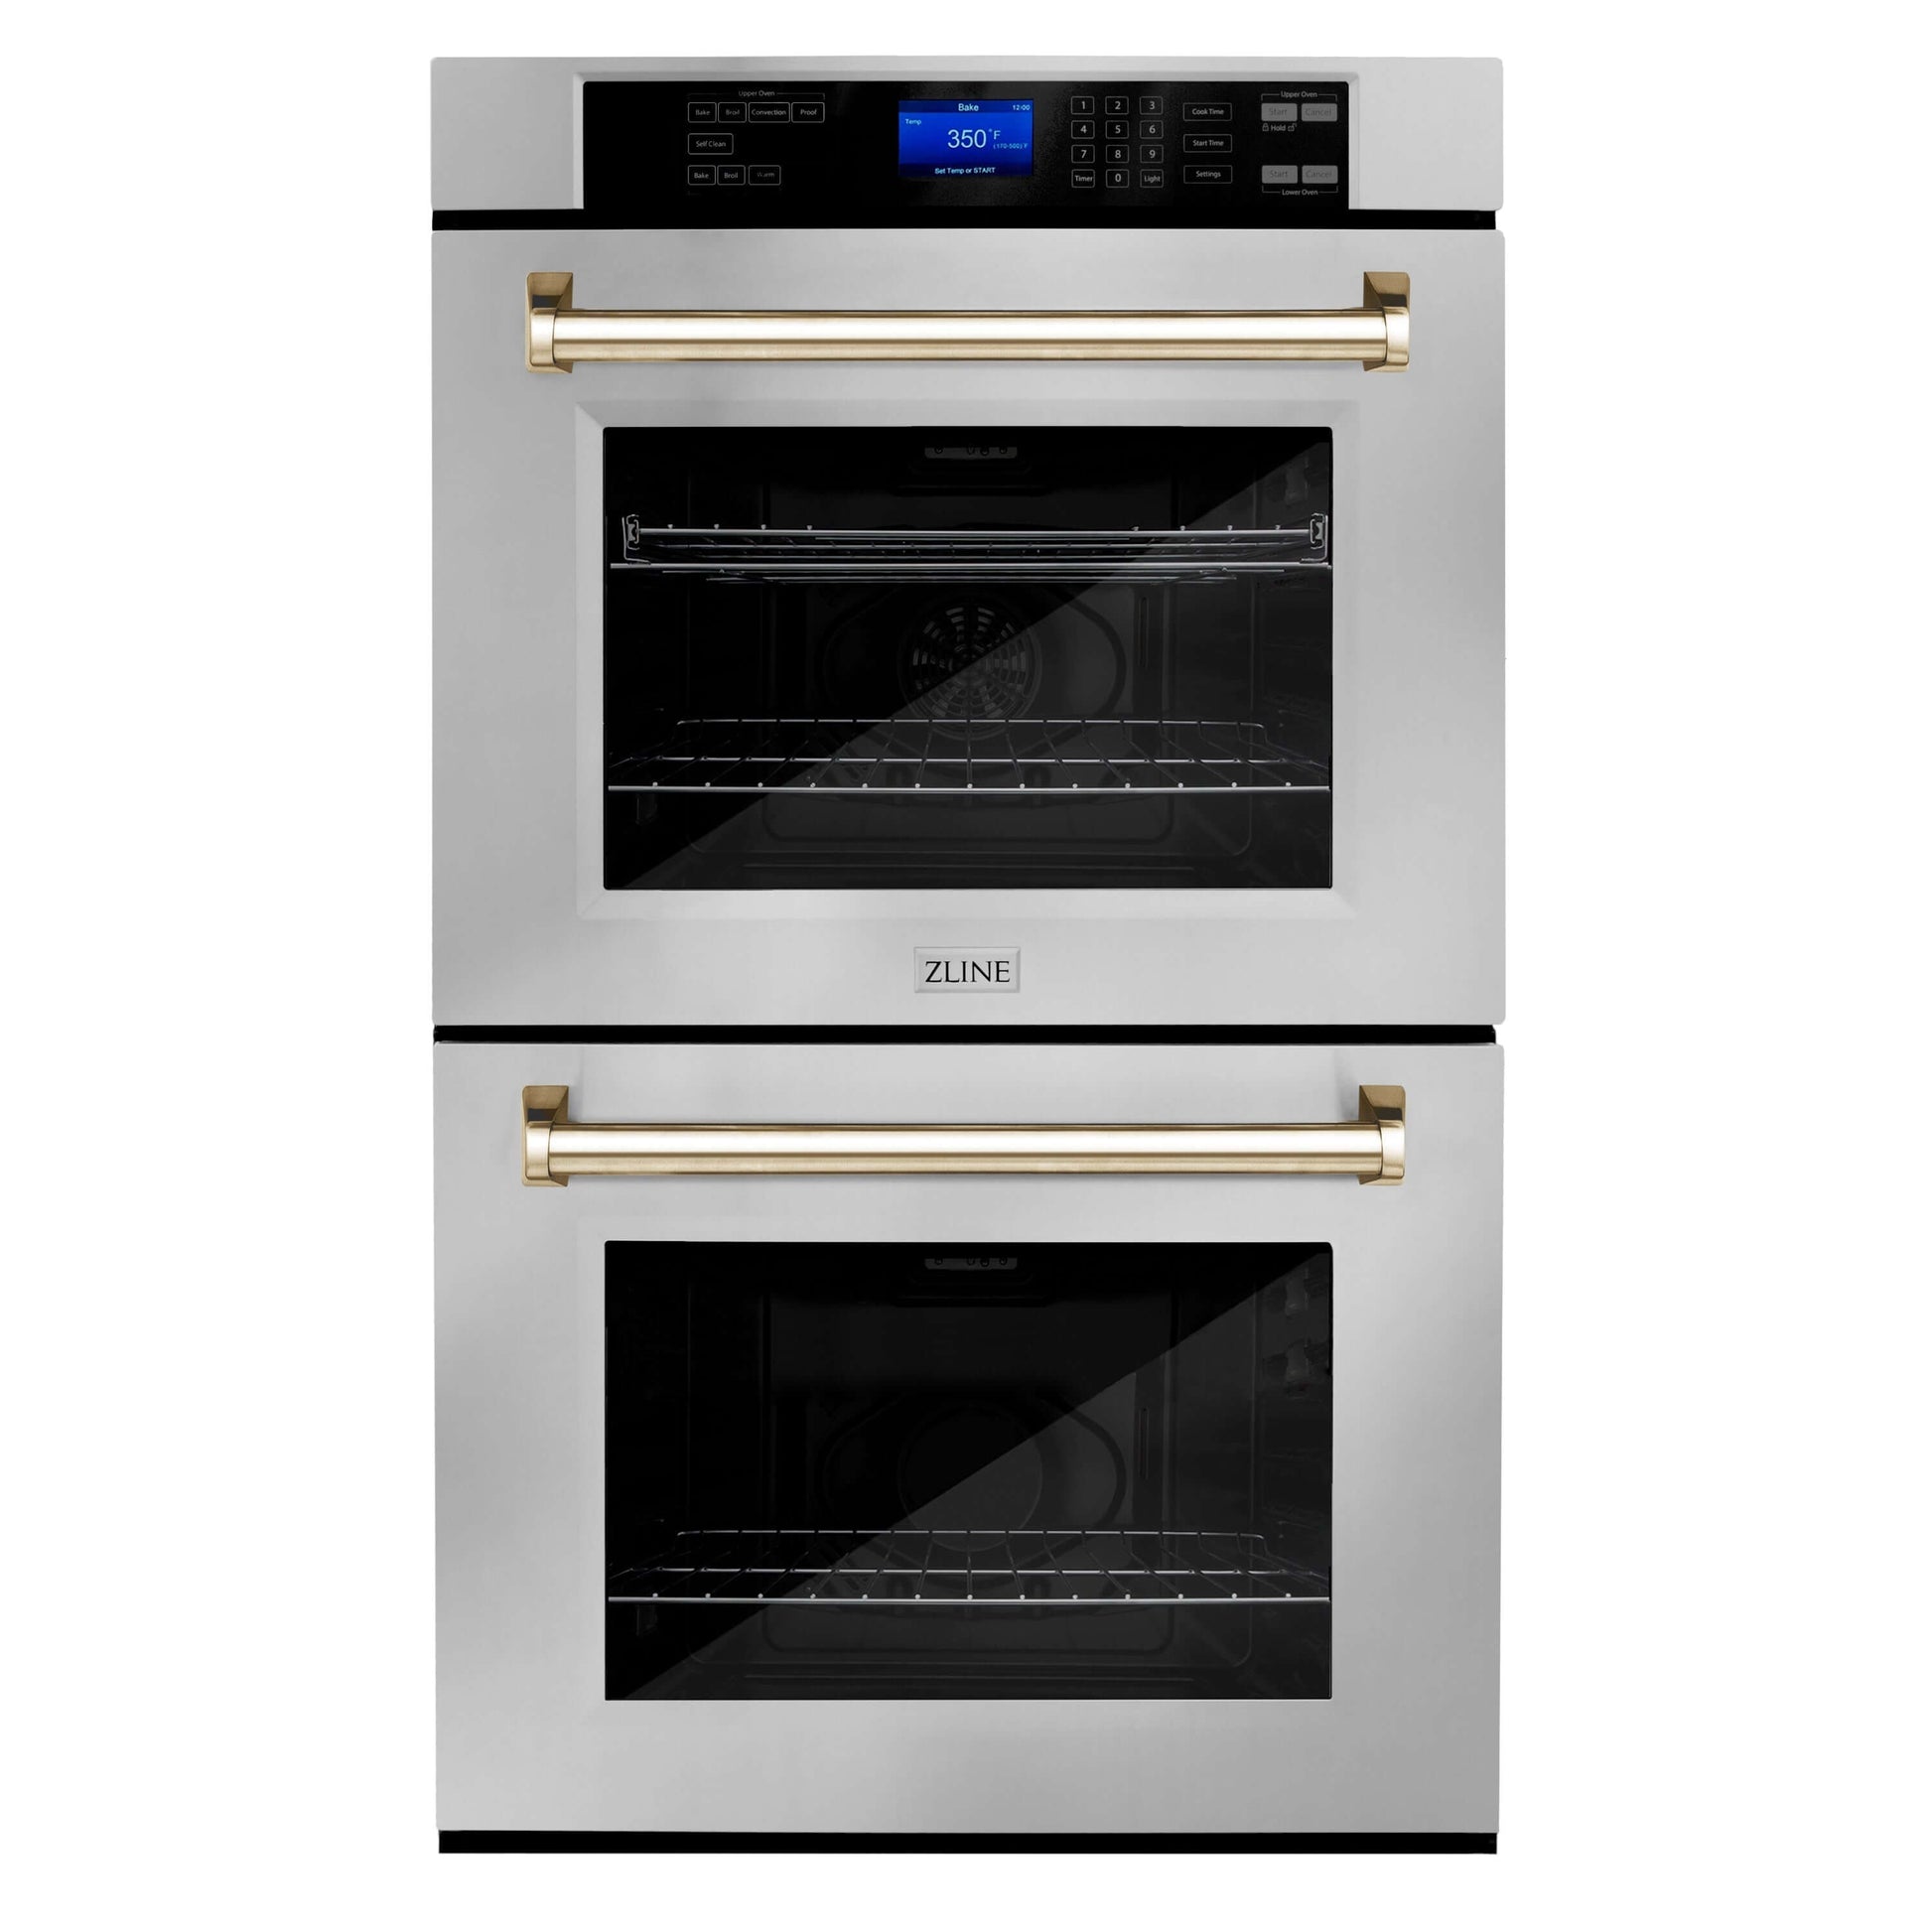 ZLINE Autograph Edition 30 in. Electric Double Wall Oven with Self Clean and True Convection in Stainless Steel and Polished Gold Accents (AWDZ-30-G) front.